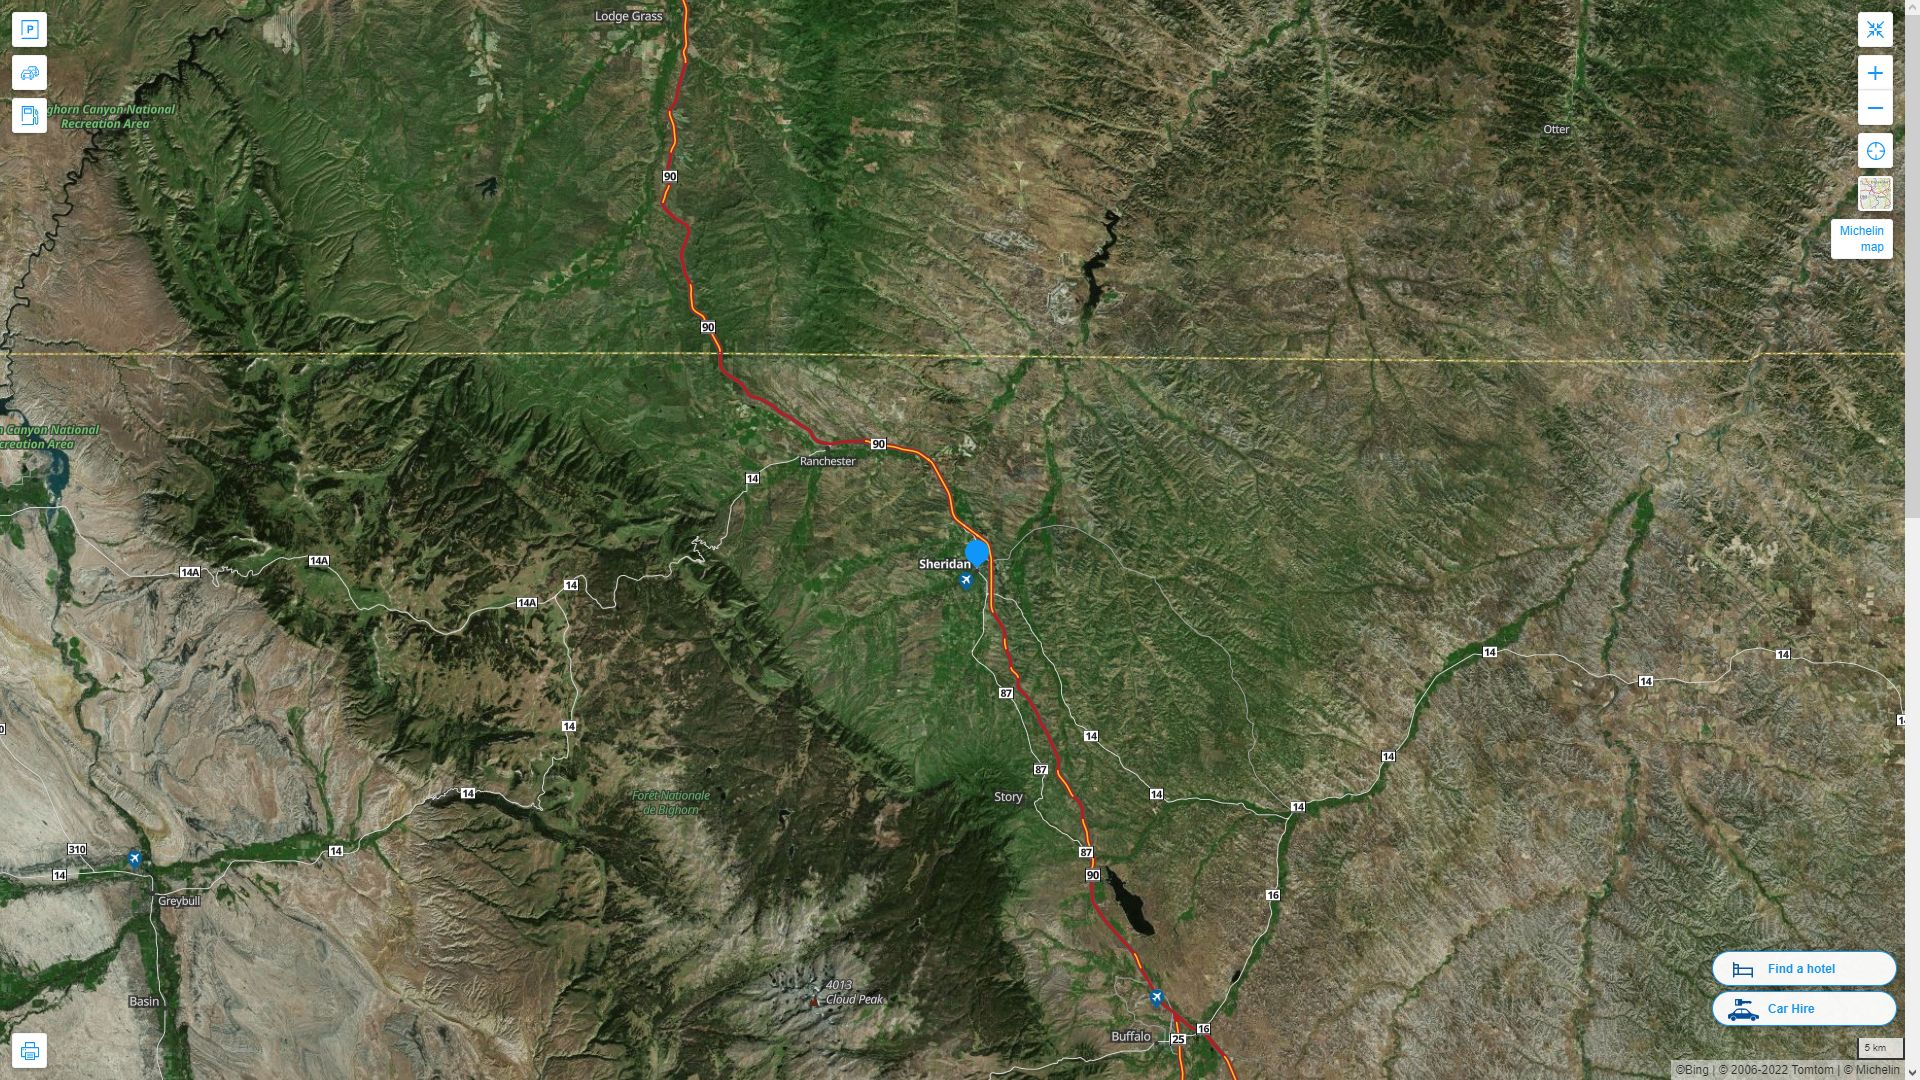 Sheridan Wyoming Highway and Road Map with Satellite View